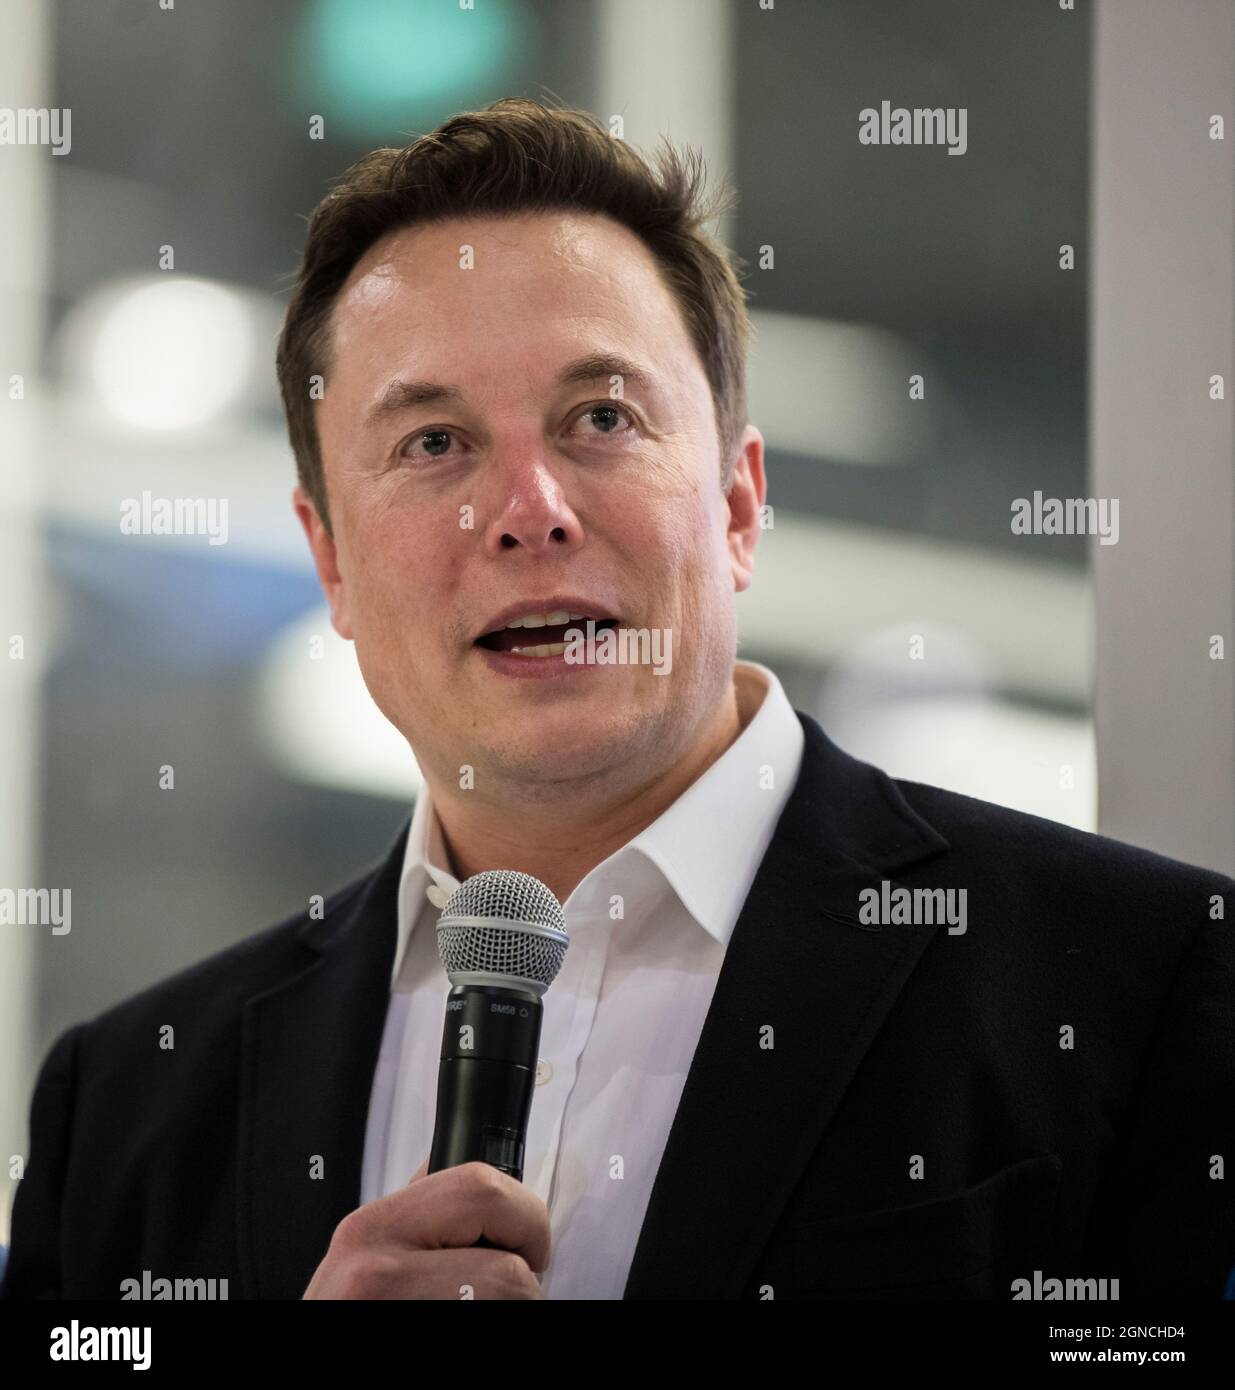 SpaceX Chief Engineer Elon Musk answers a question from the press in front of the Crew Dragon that is being prepared for the Demo-2 mission, at SpaceX Headquarters, Thursday, Oct. 10, 2019 in Hawthorne, CA. Photo credit: (NASA/Aubrey Gemignani)  An optimised and digitally enhanced version of a NASA image by NASA photographer Aubrey Gemignani/ credit NASA. Editorial use only. Stock Photo